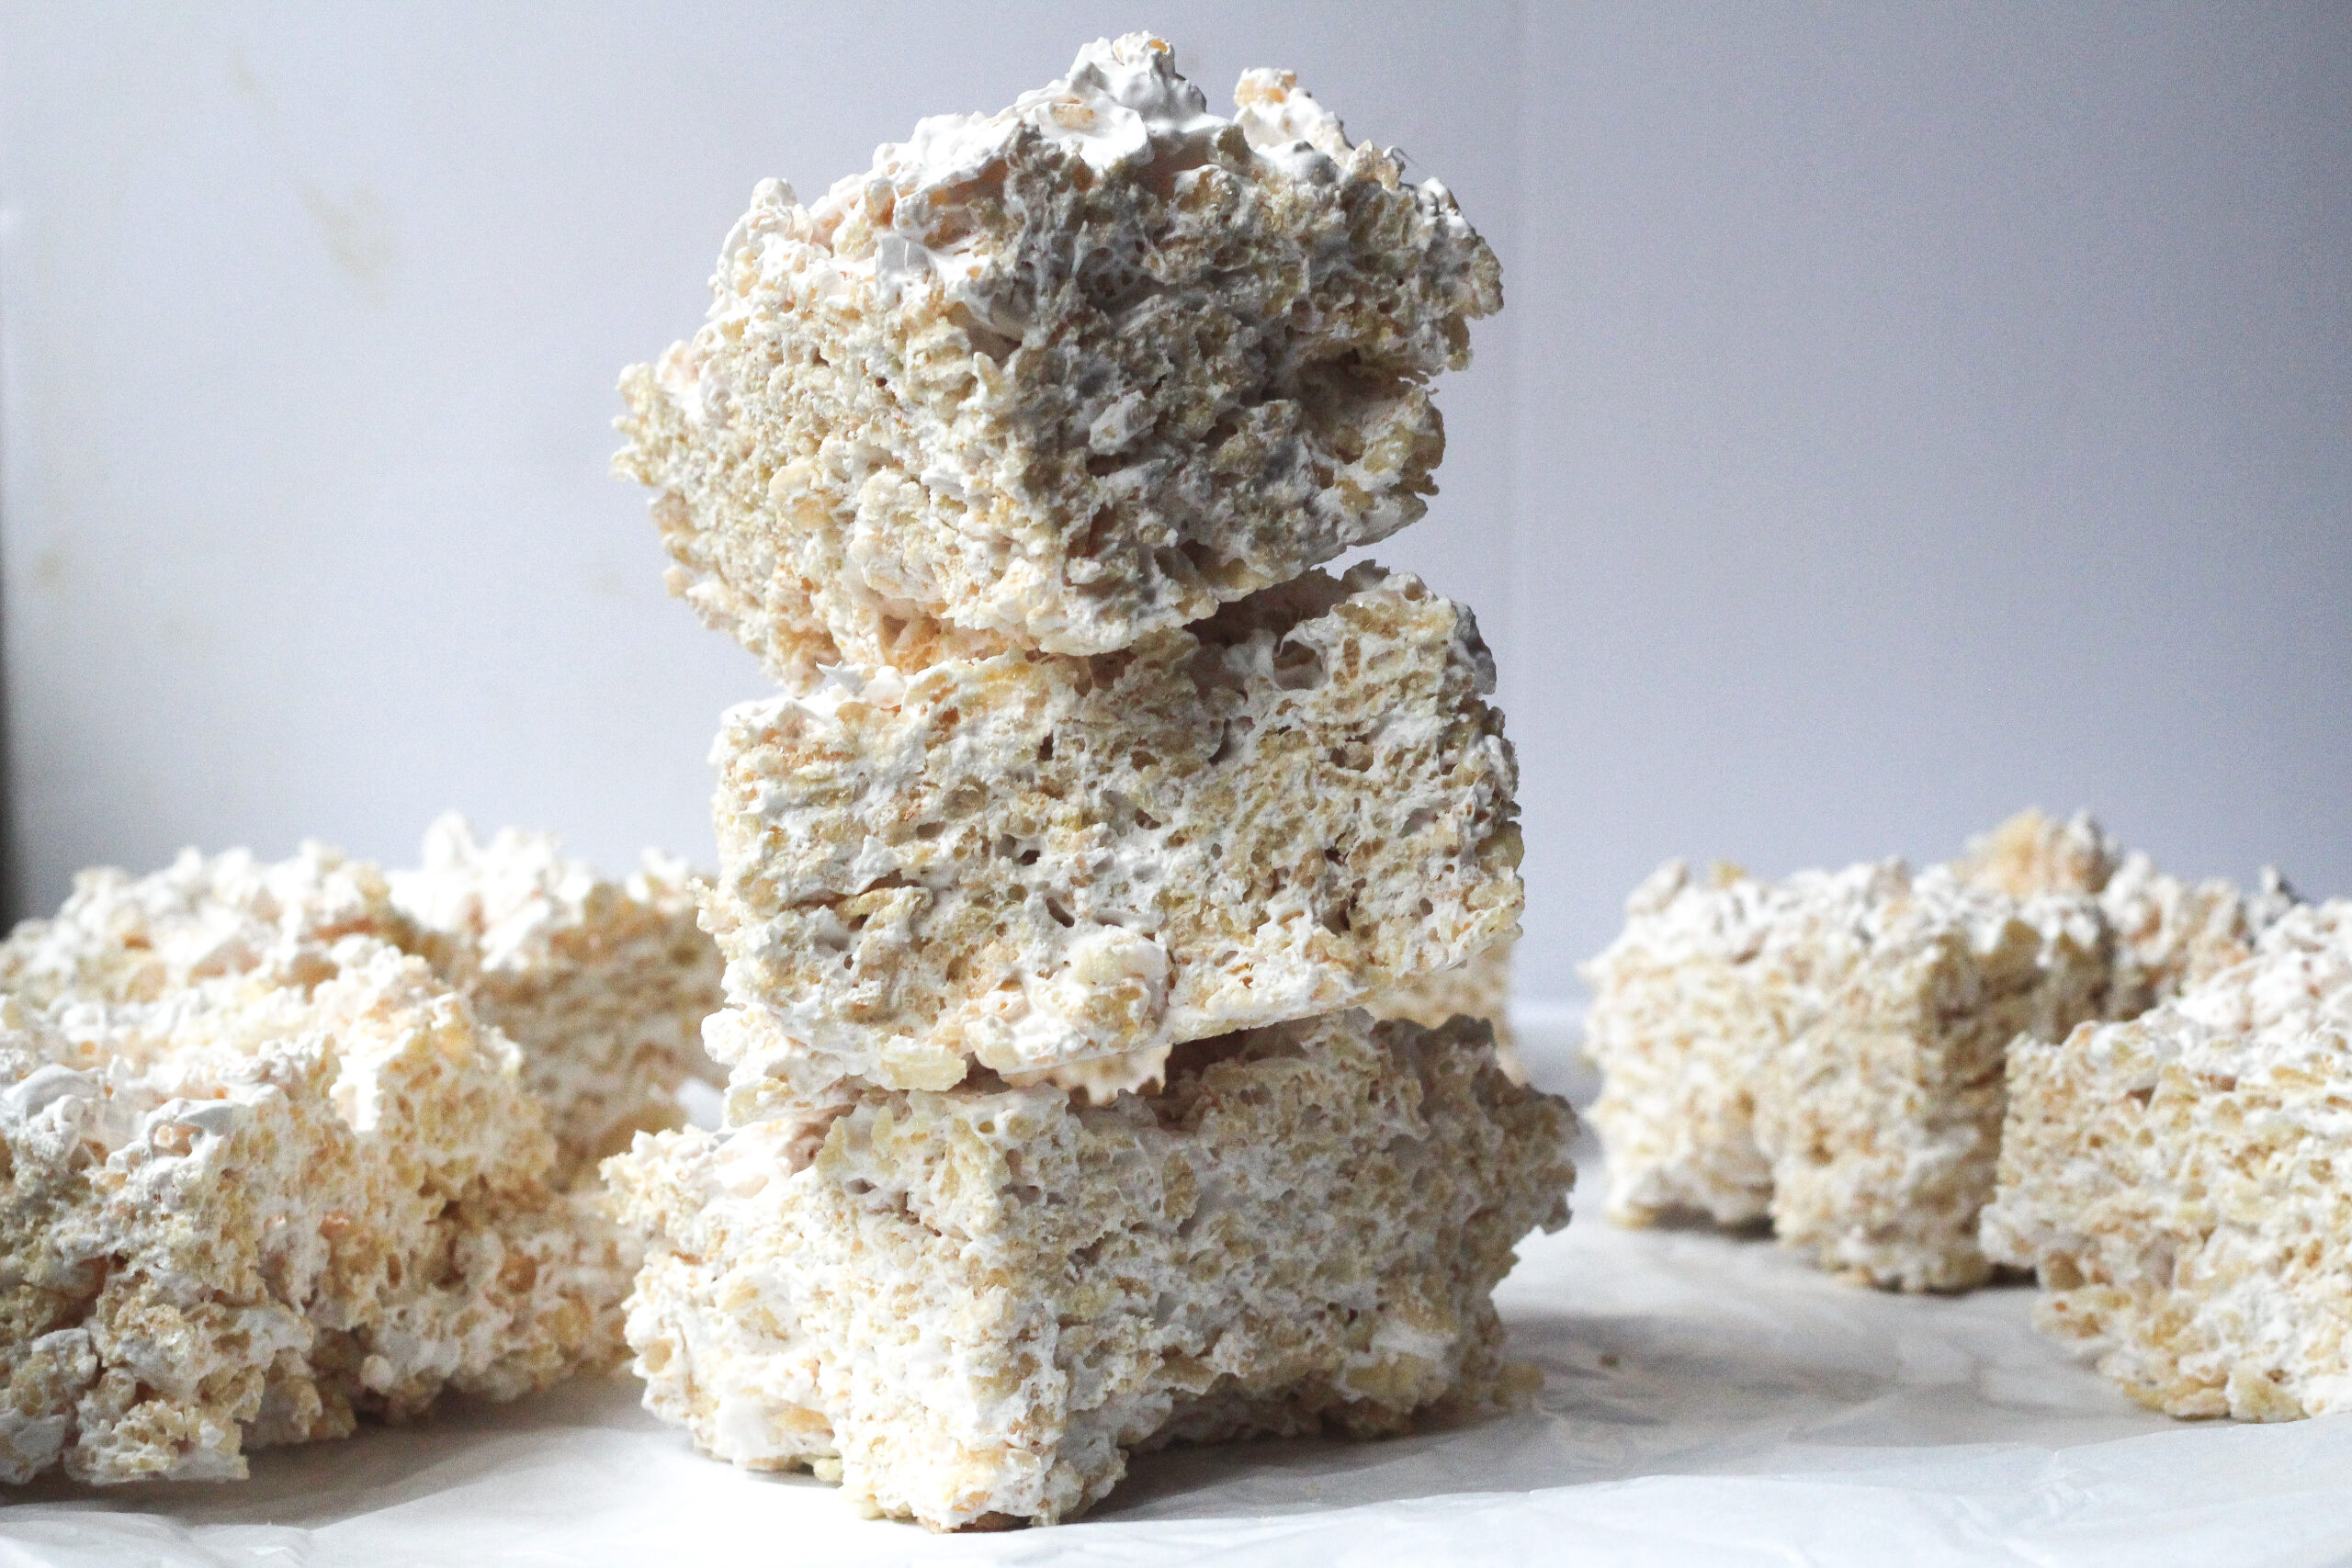 A stack of 3 maple rice krispie treats on a white marbled surface in front of a grey background and a few more maple rice krispie treats in a single layer